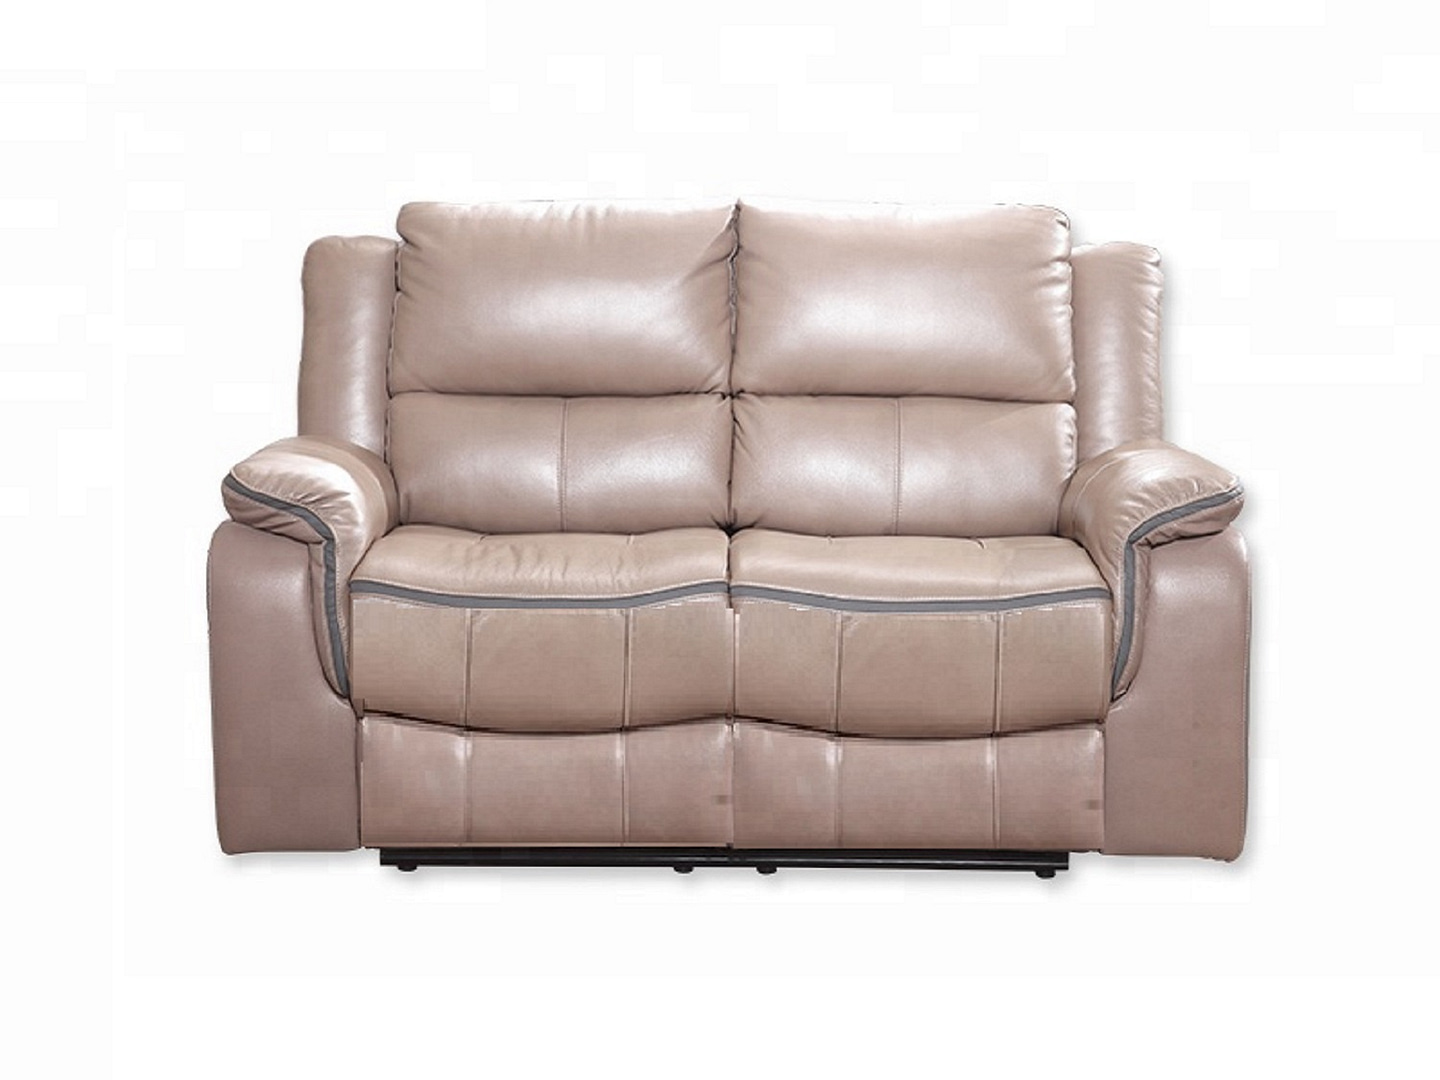 SONNA Leather Reclining Loveseat - Zoom